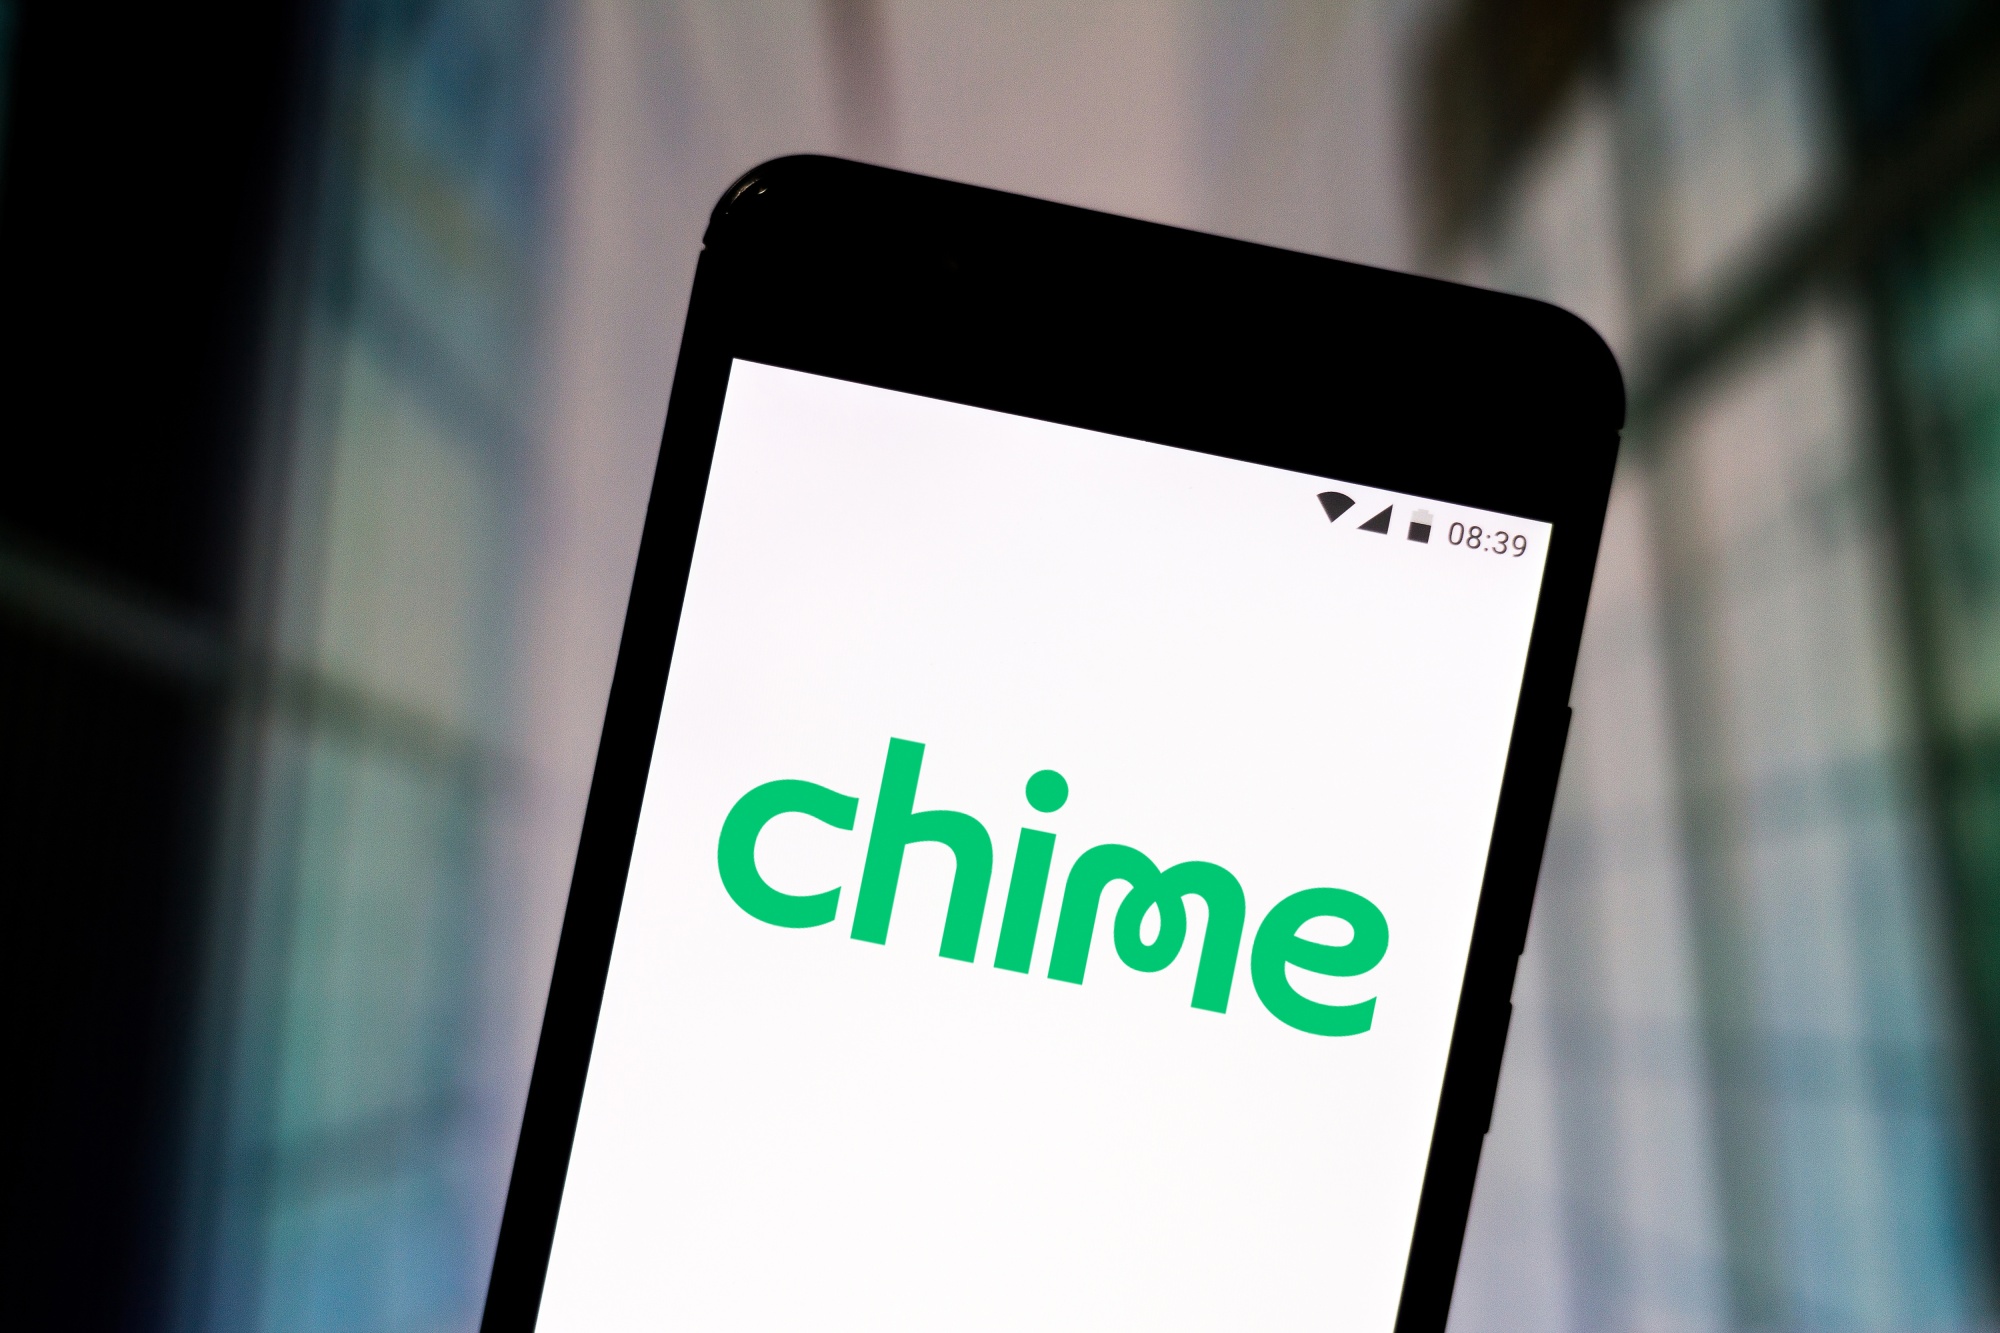 Chime has been a closely watched IPO candidate for a few years.